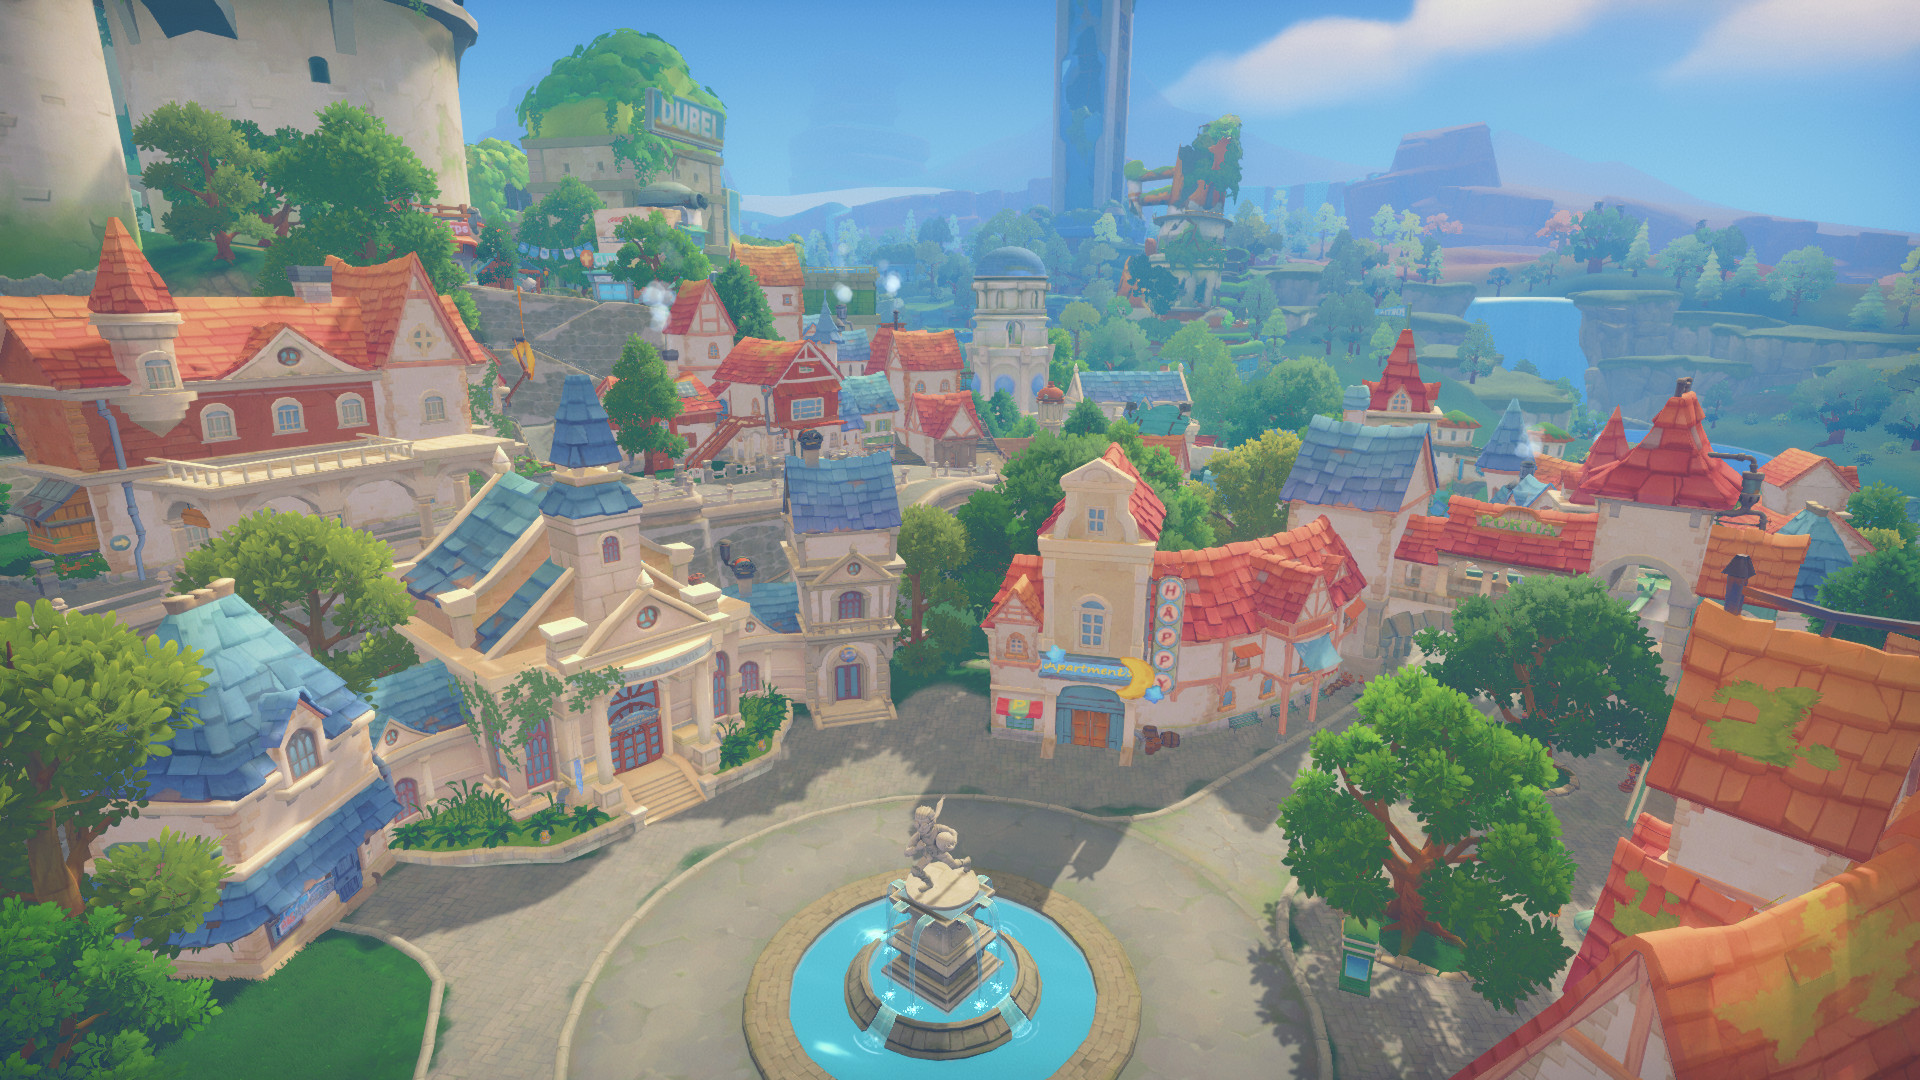 my time at portia wiki grinder